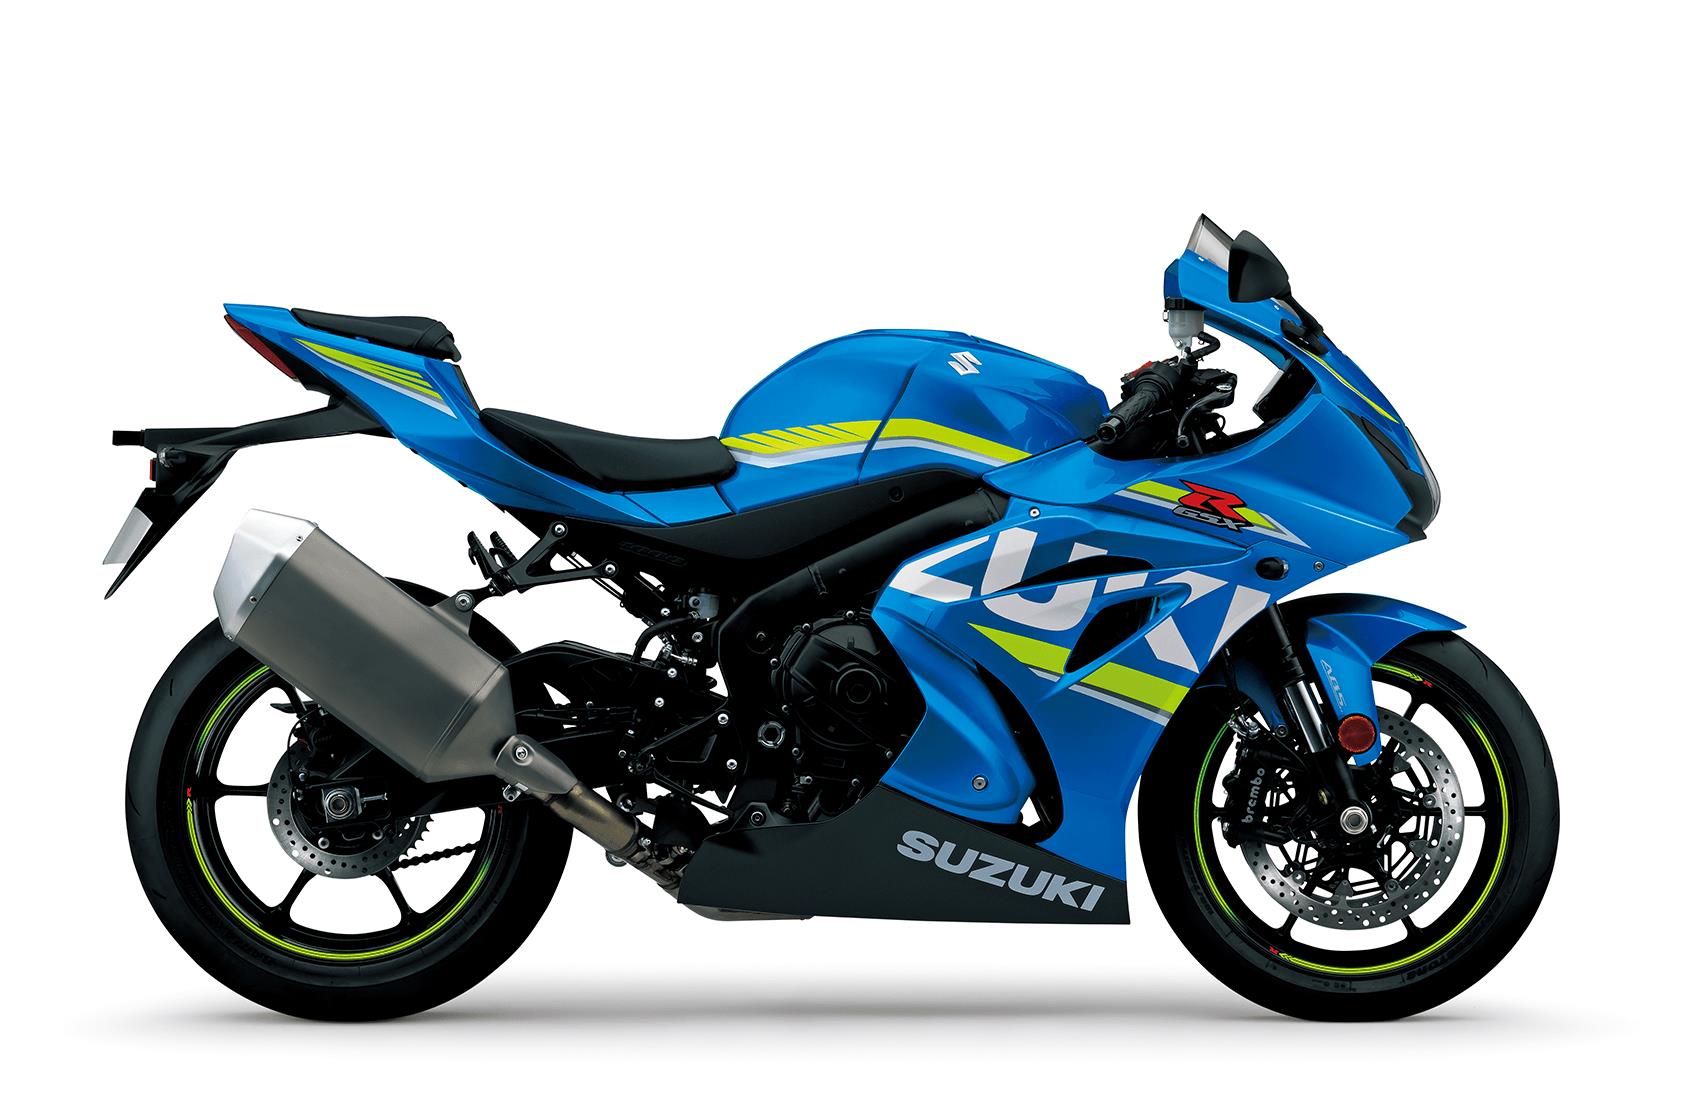 5 Things You Need To Know About The 2017 Suzuki GSX-R1000